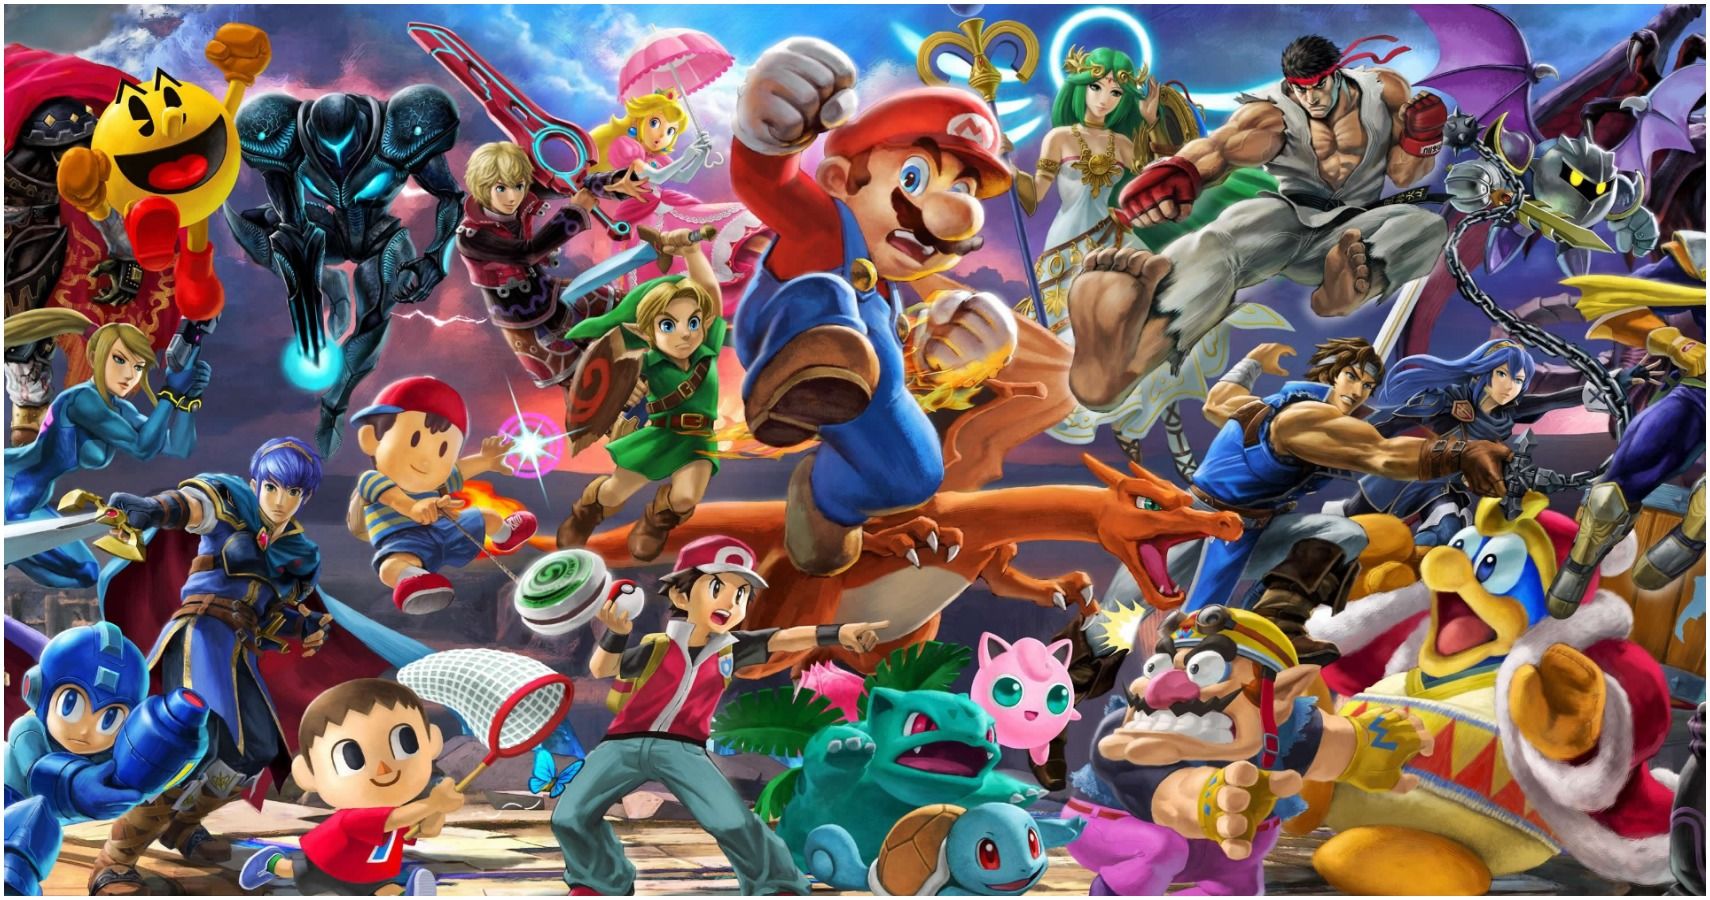 Who is the least played smash character?